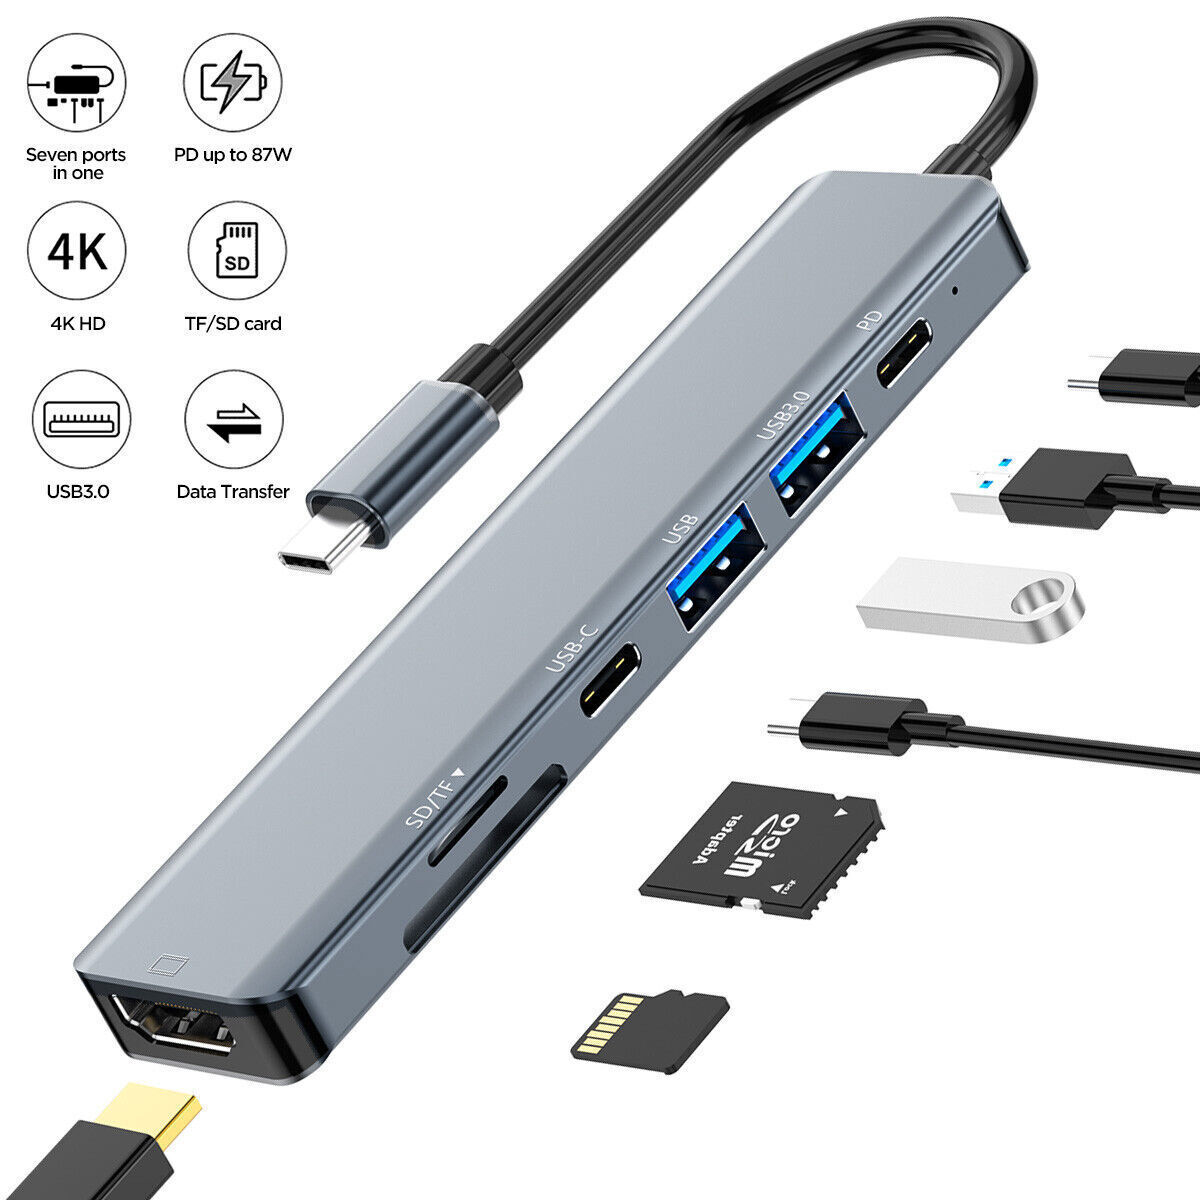 7-in-1 USB C Hub Multiport Adapter Ethernet For Mac, Windows Chromebook, Dell 